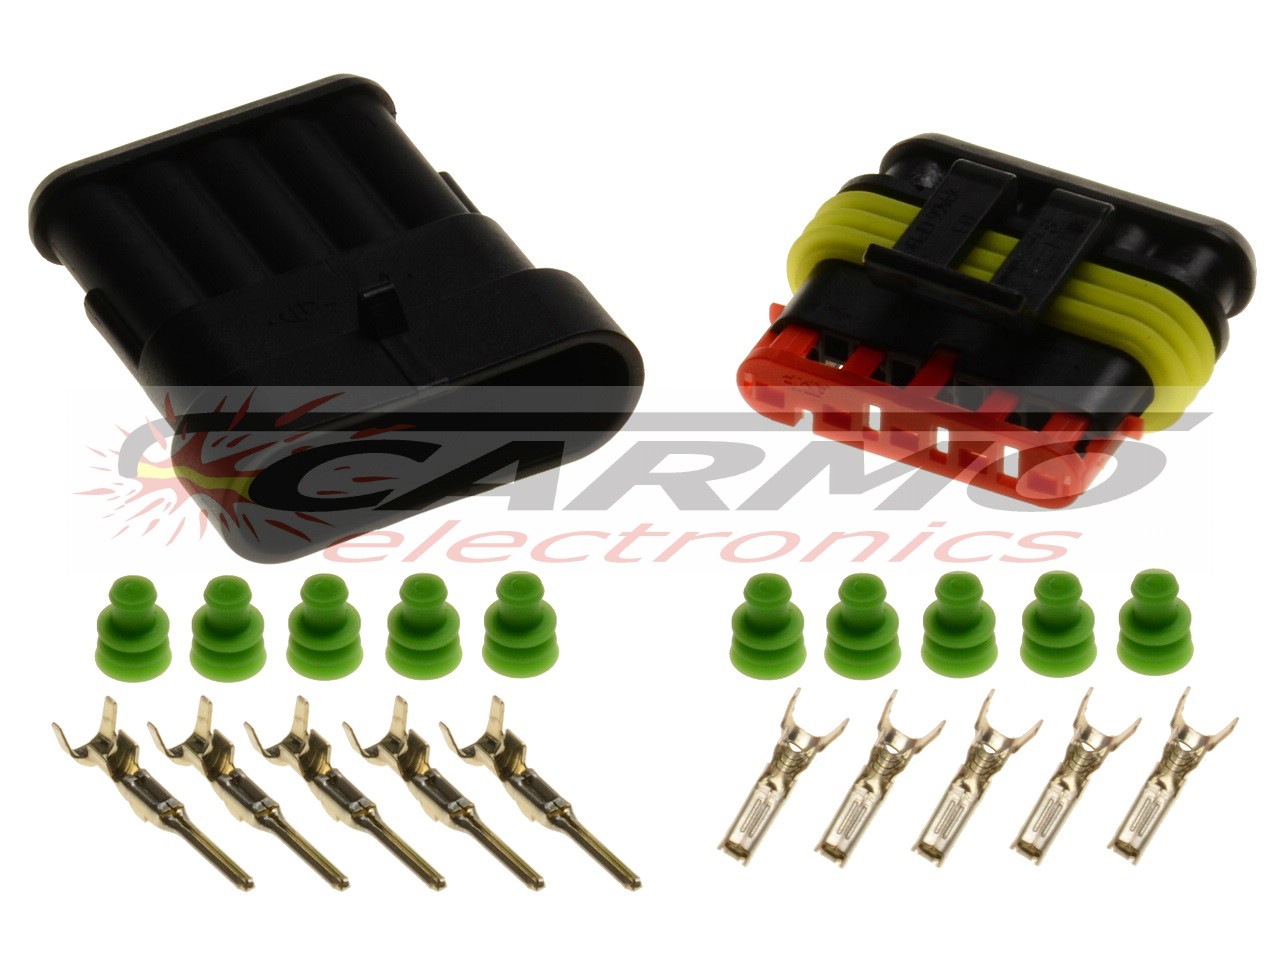 5pin 1.5 superseal connector set - Click Image to Close